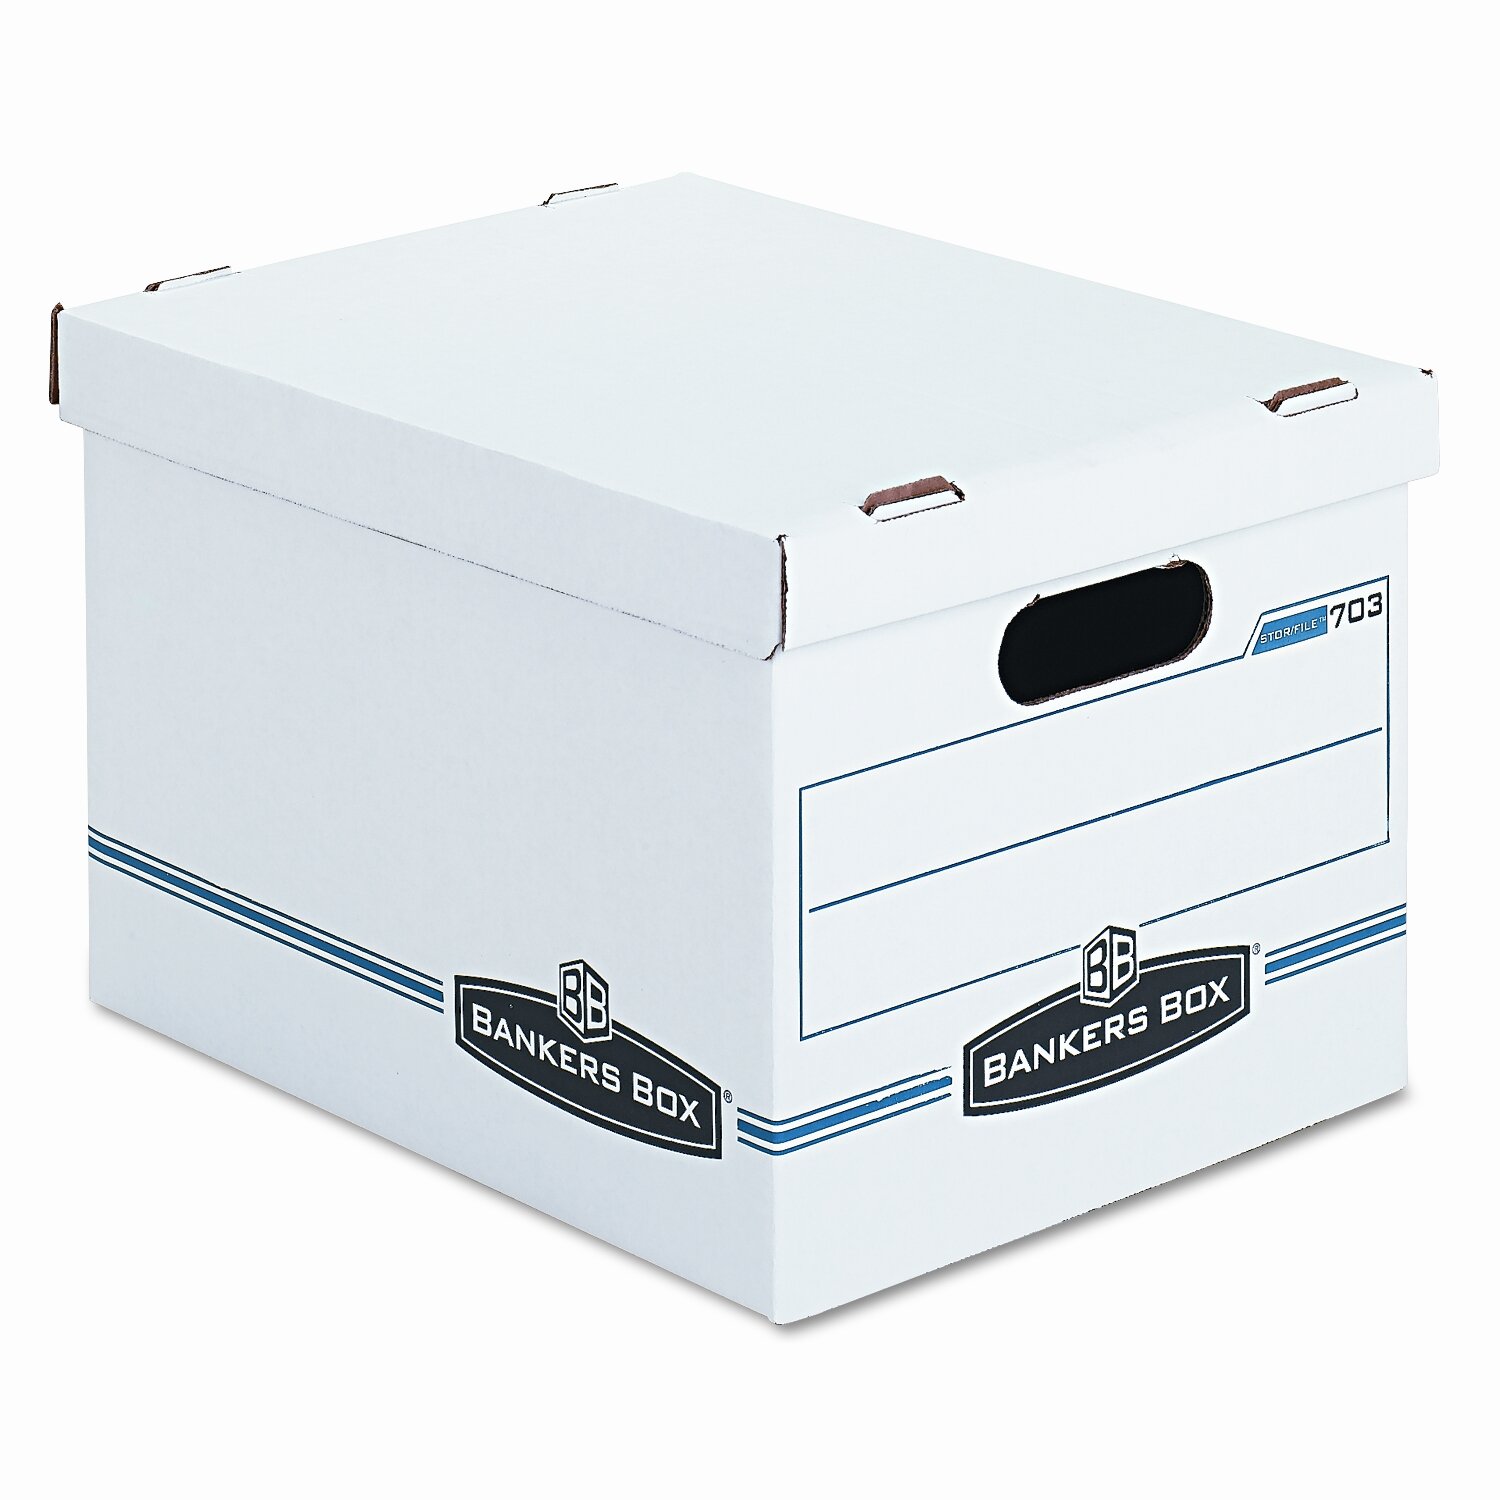 Bankers Box Letter/Legal Size Storage Boxes, 4 per Carton, White,  Small/Large Office - Basic Duty 